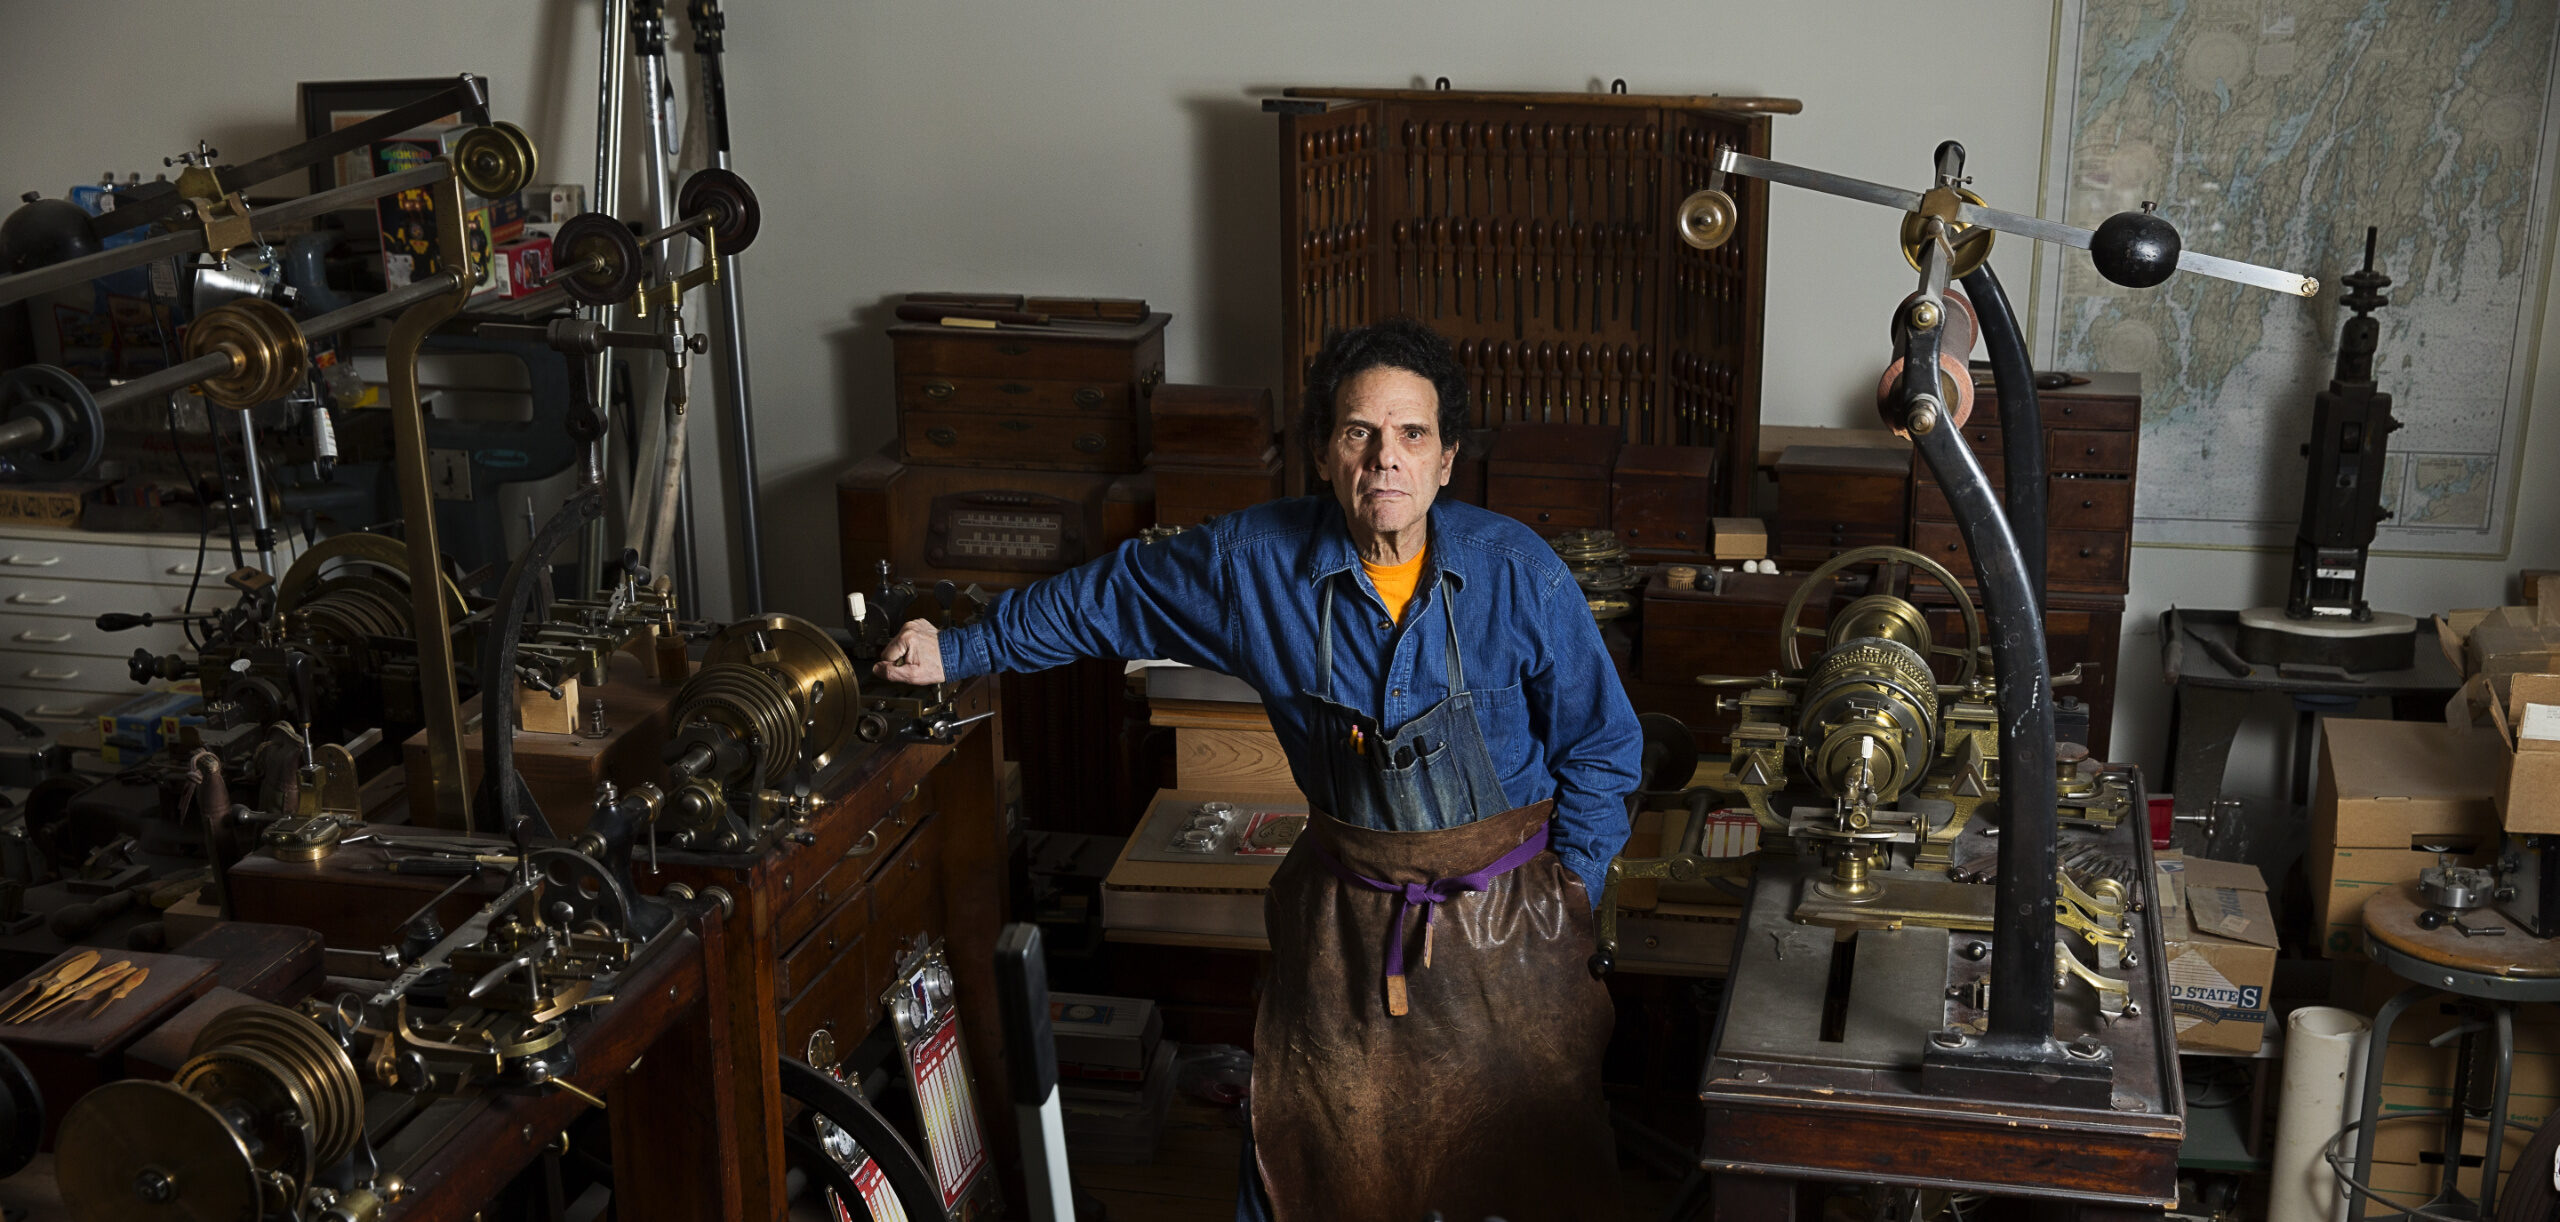 Daniel Brush with his ornamental lathes – Photo Credit Nathan Crooker